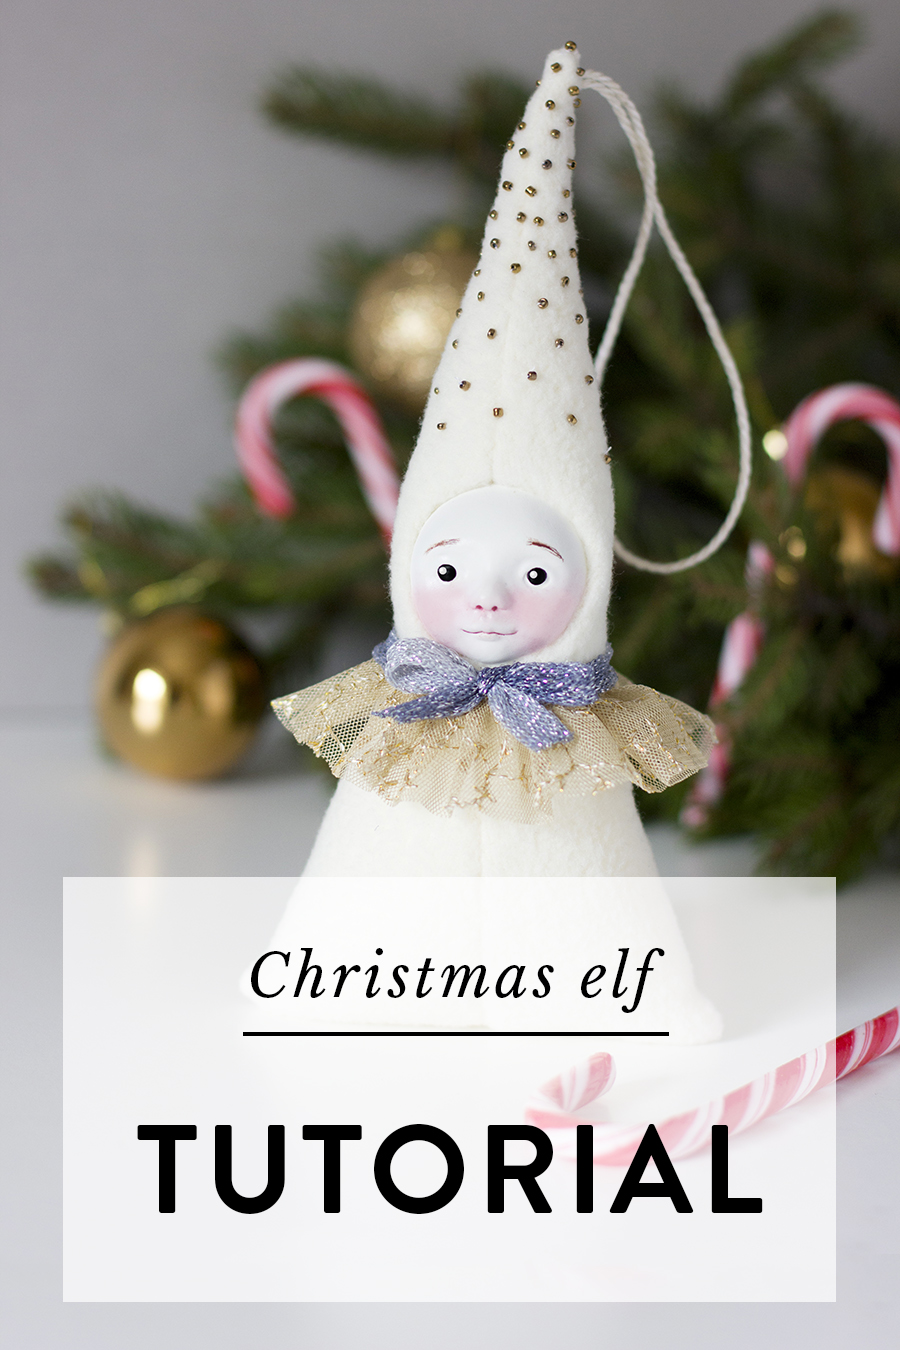 READY 2 LEARN Christmas Crafts - Create Your Own Bead Elves - DIY Ornaments  for Kids - Christmas Tree Decoration - All Materials Included